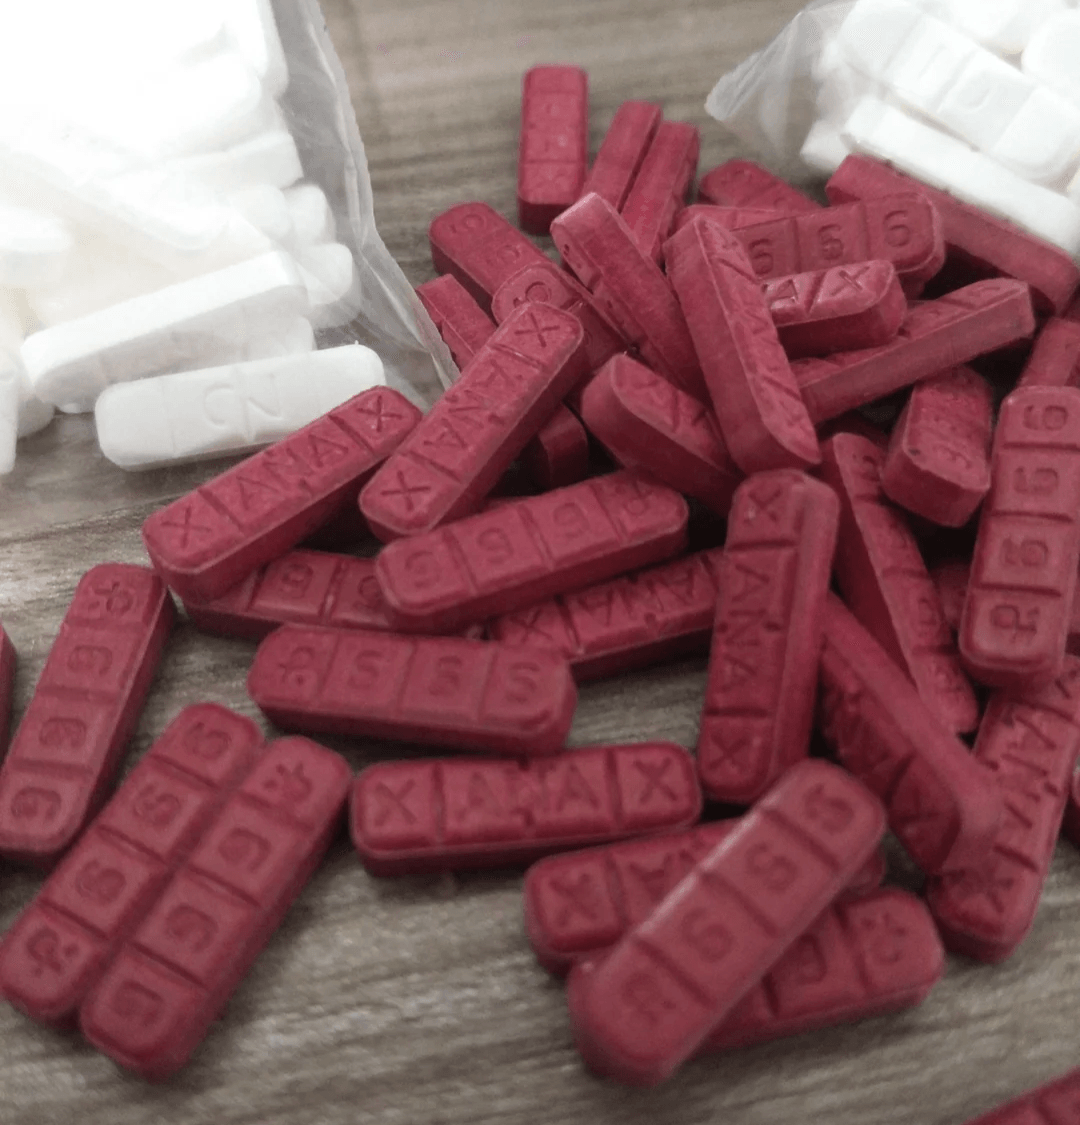 Xanax Bars: Types, Strength, Dangers, and Side Effects